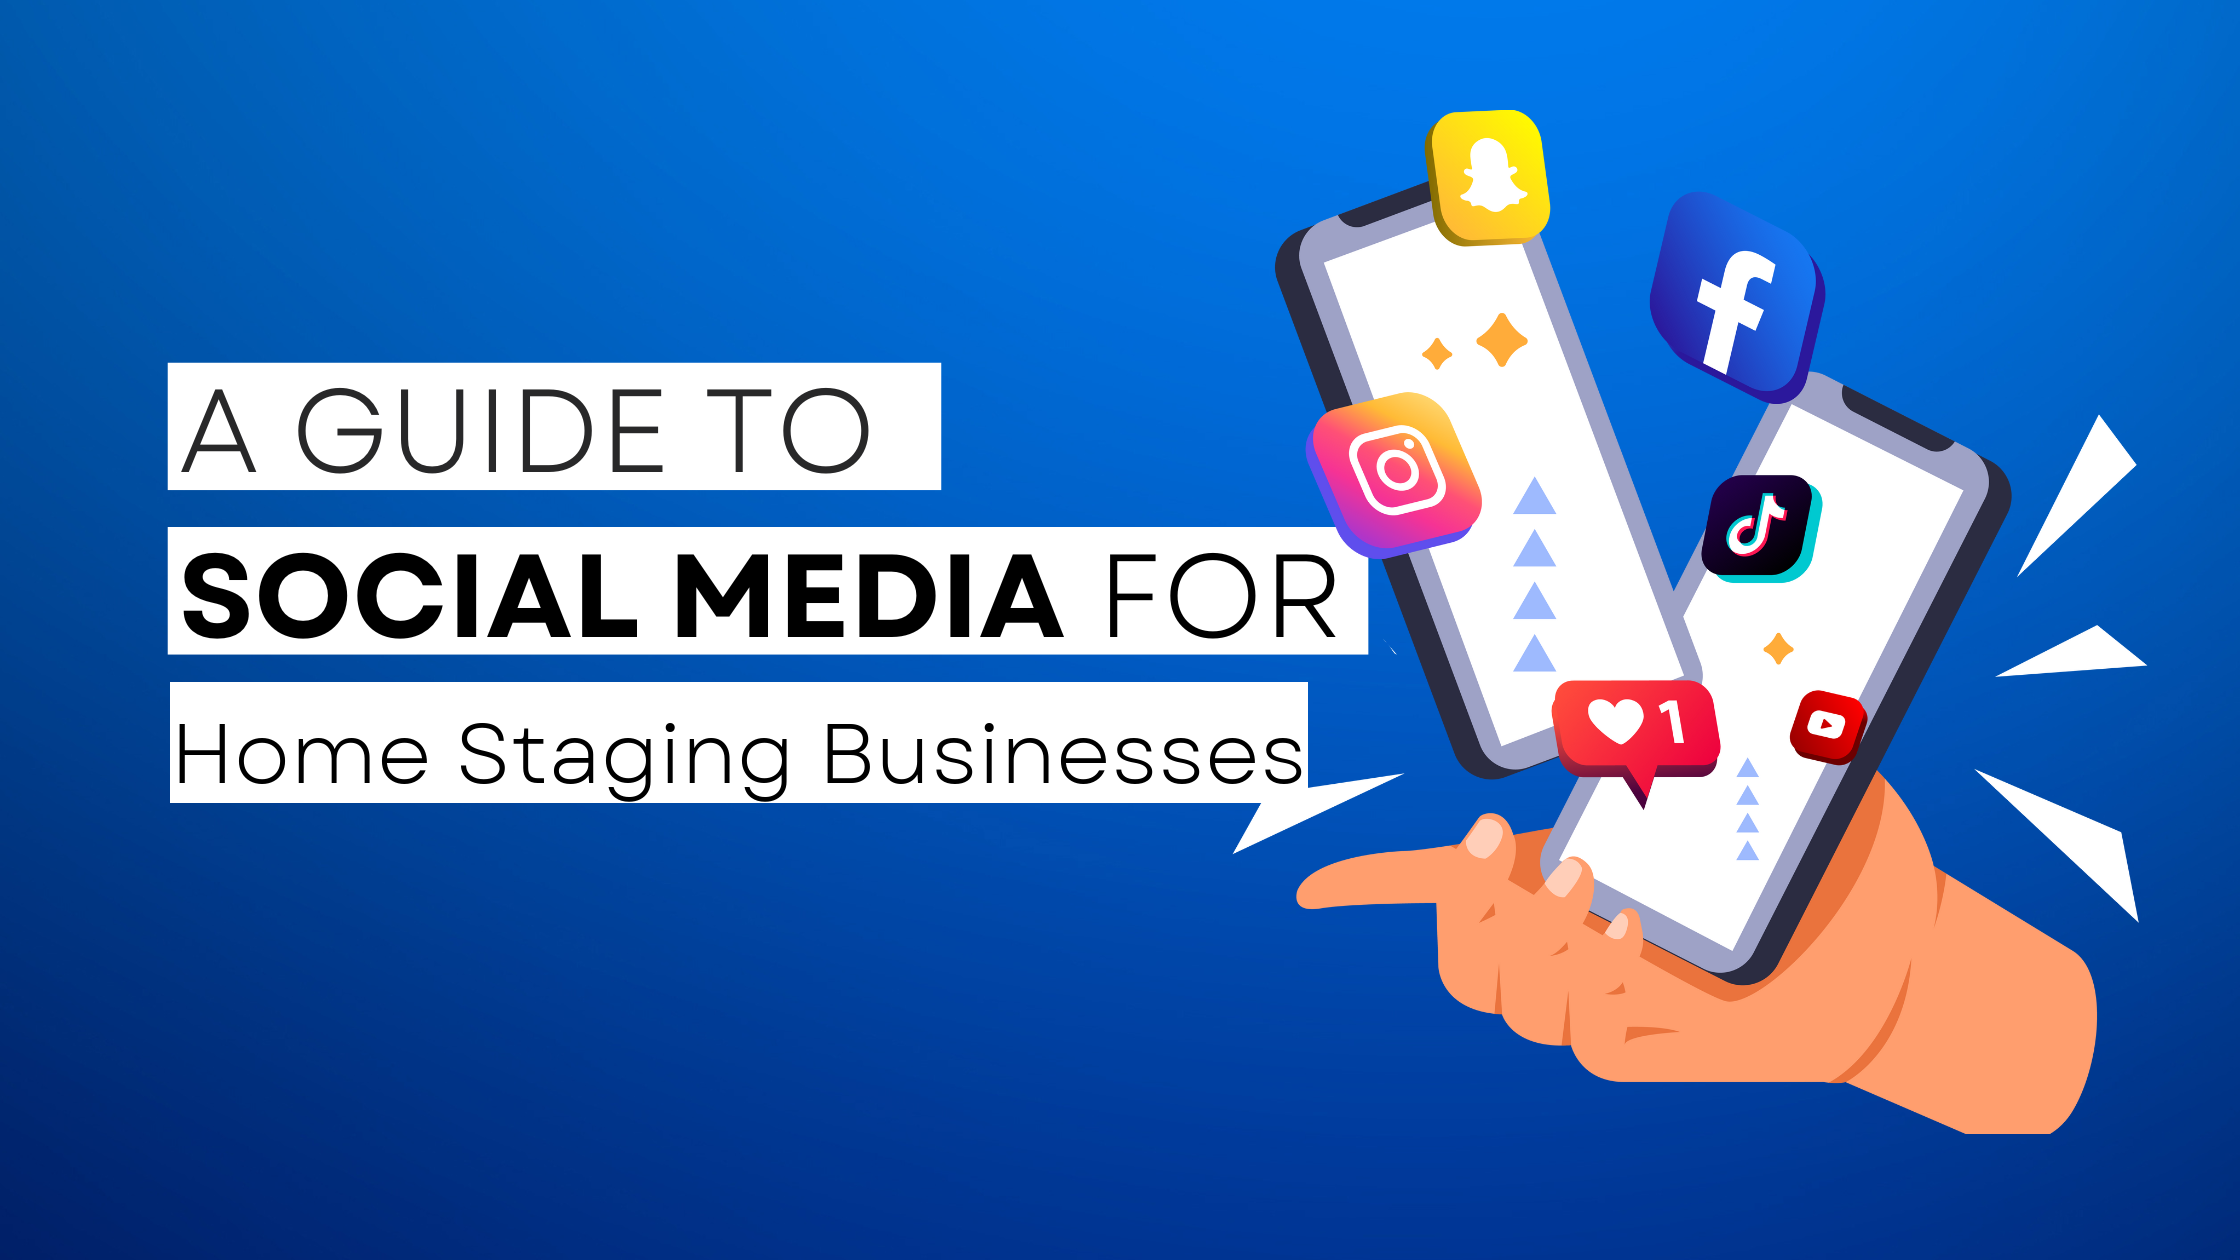 How to start Home Staging on social media